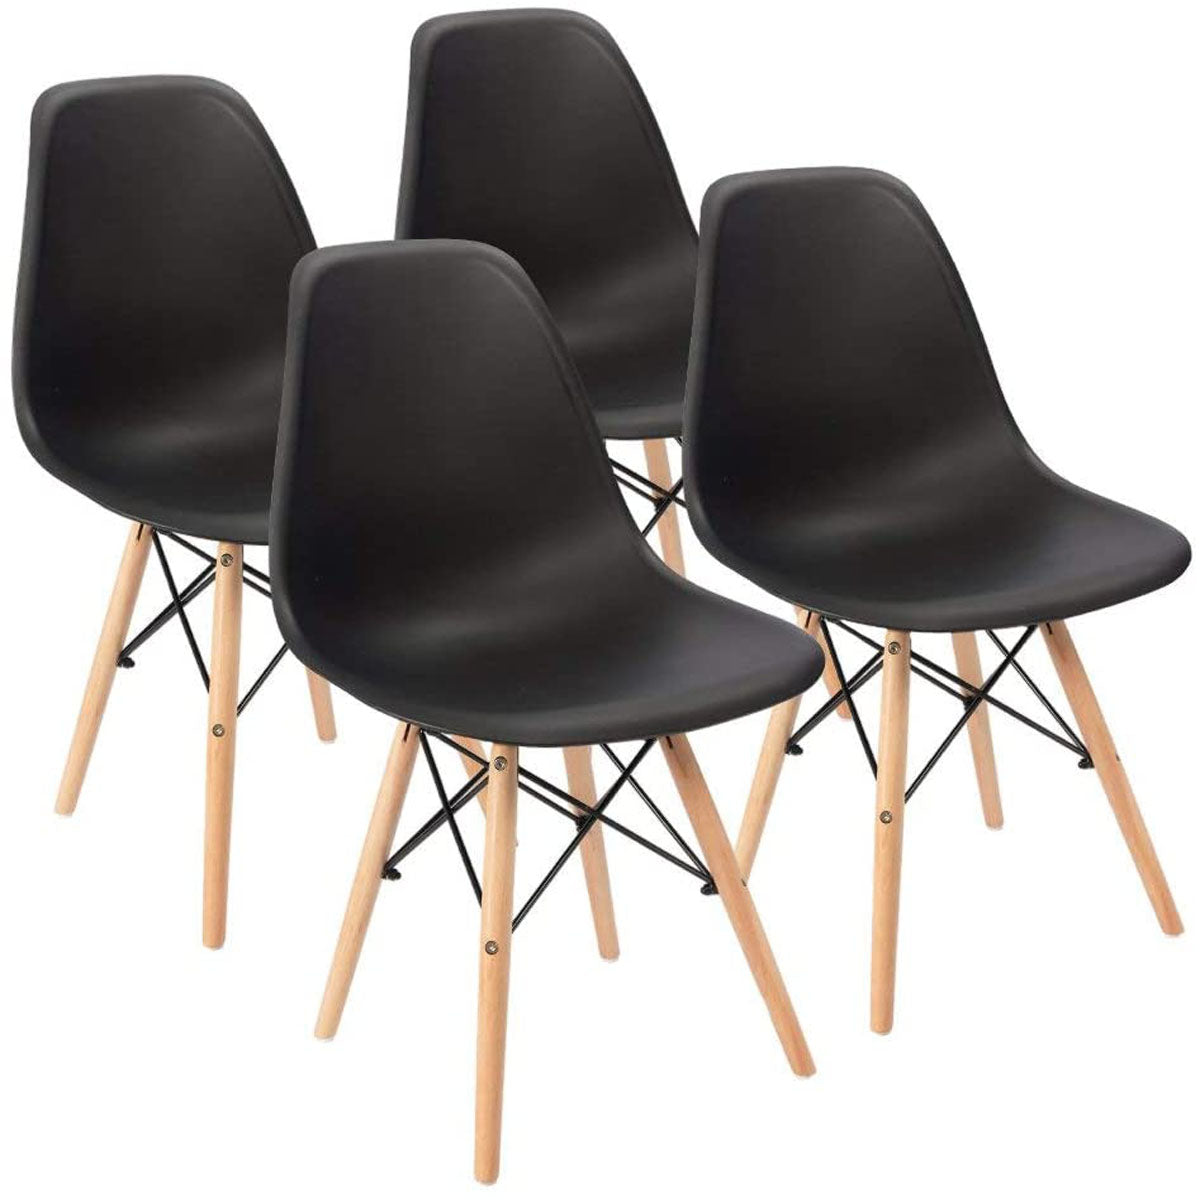 AIDEN- Set of 4 Dining Chairs